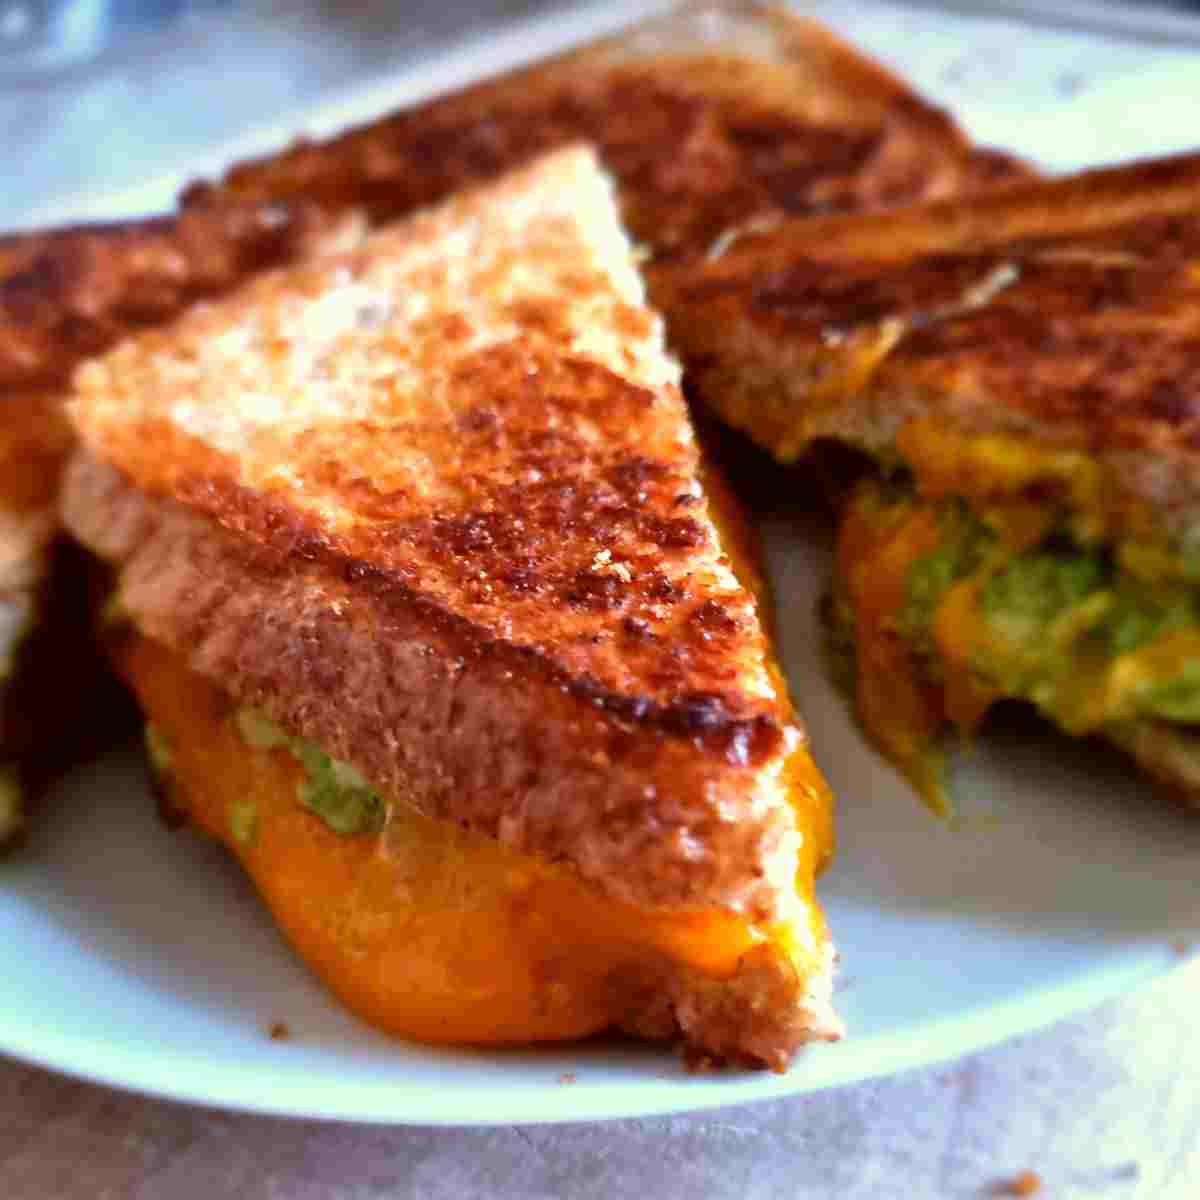 Avocado grilled cheese sandwiches.